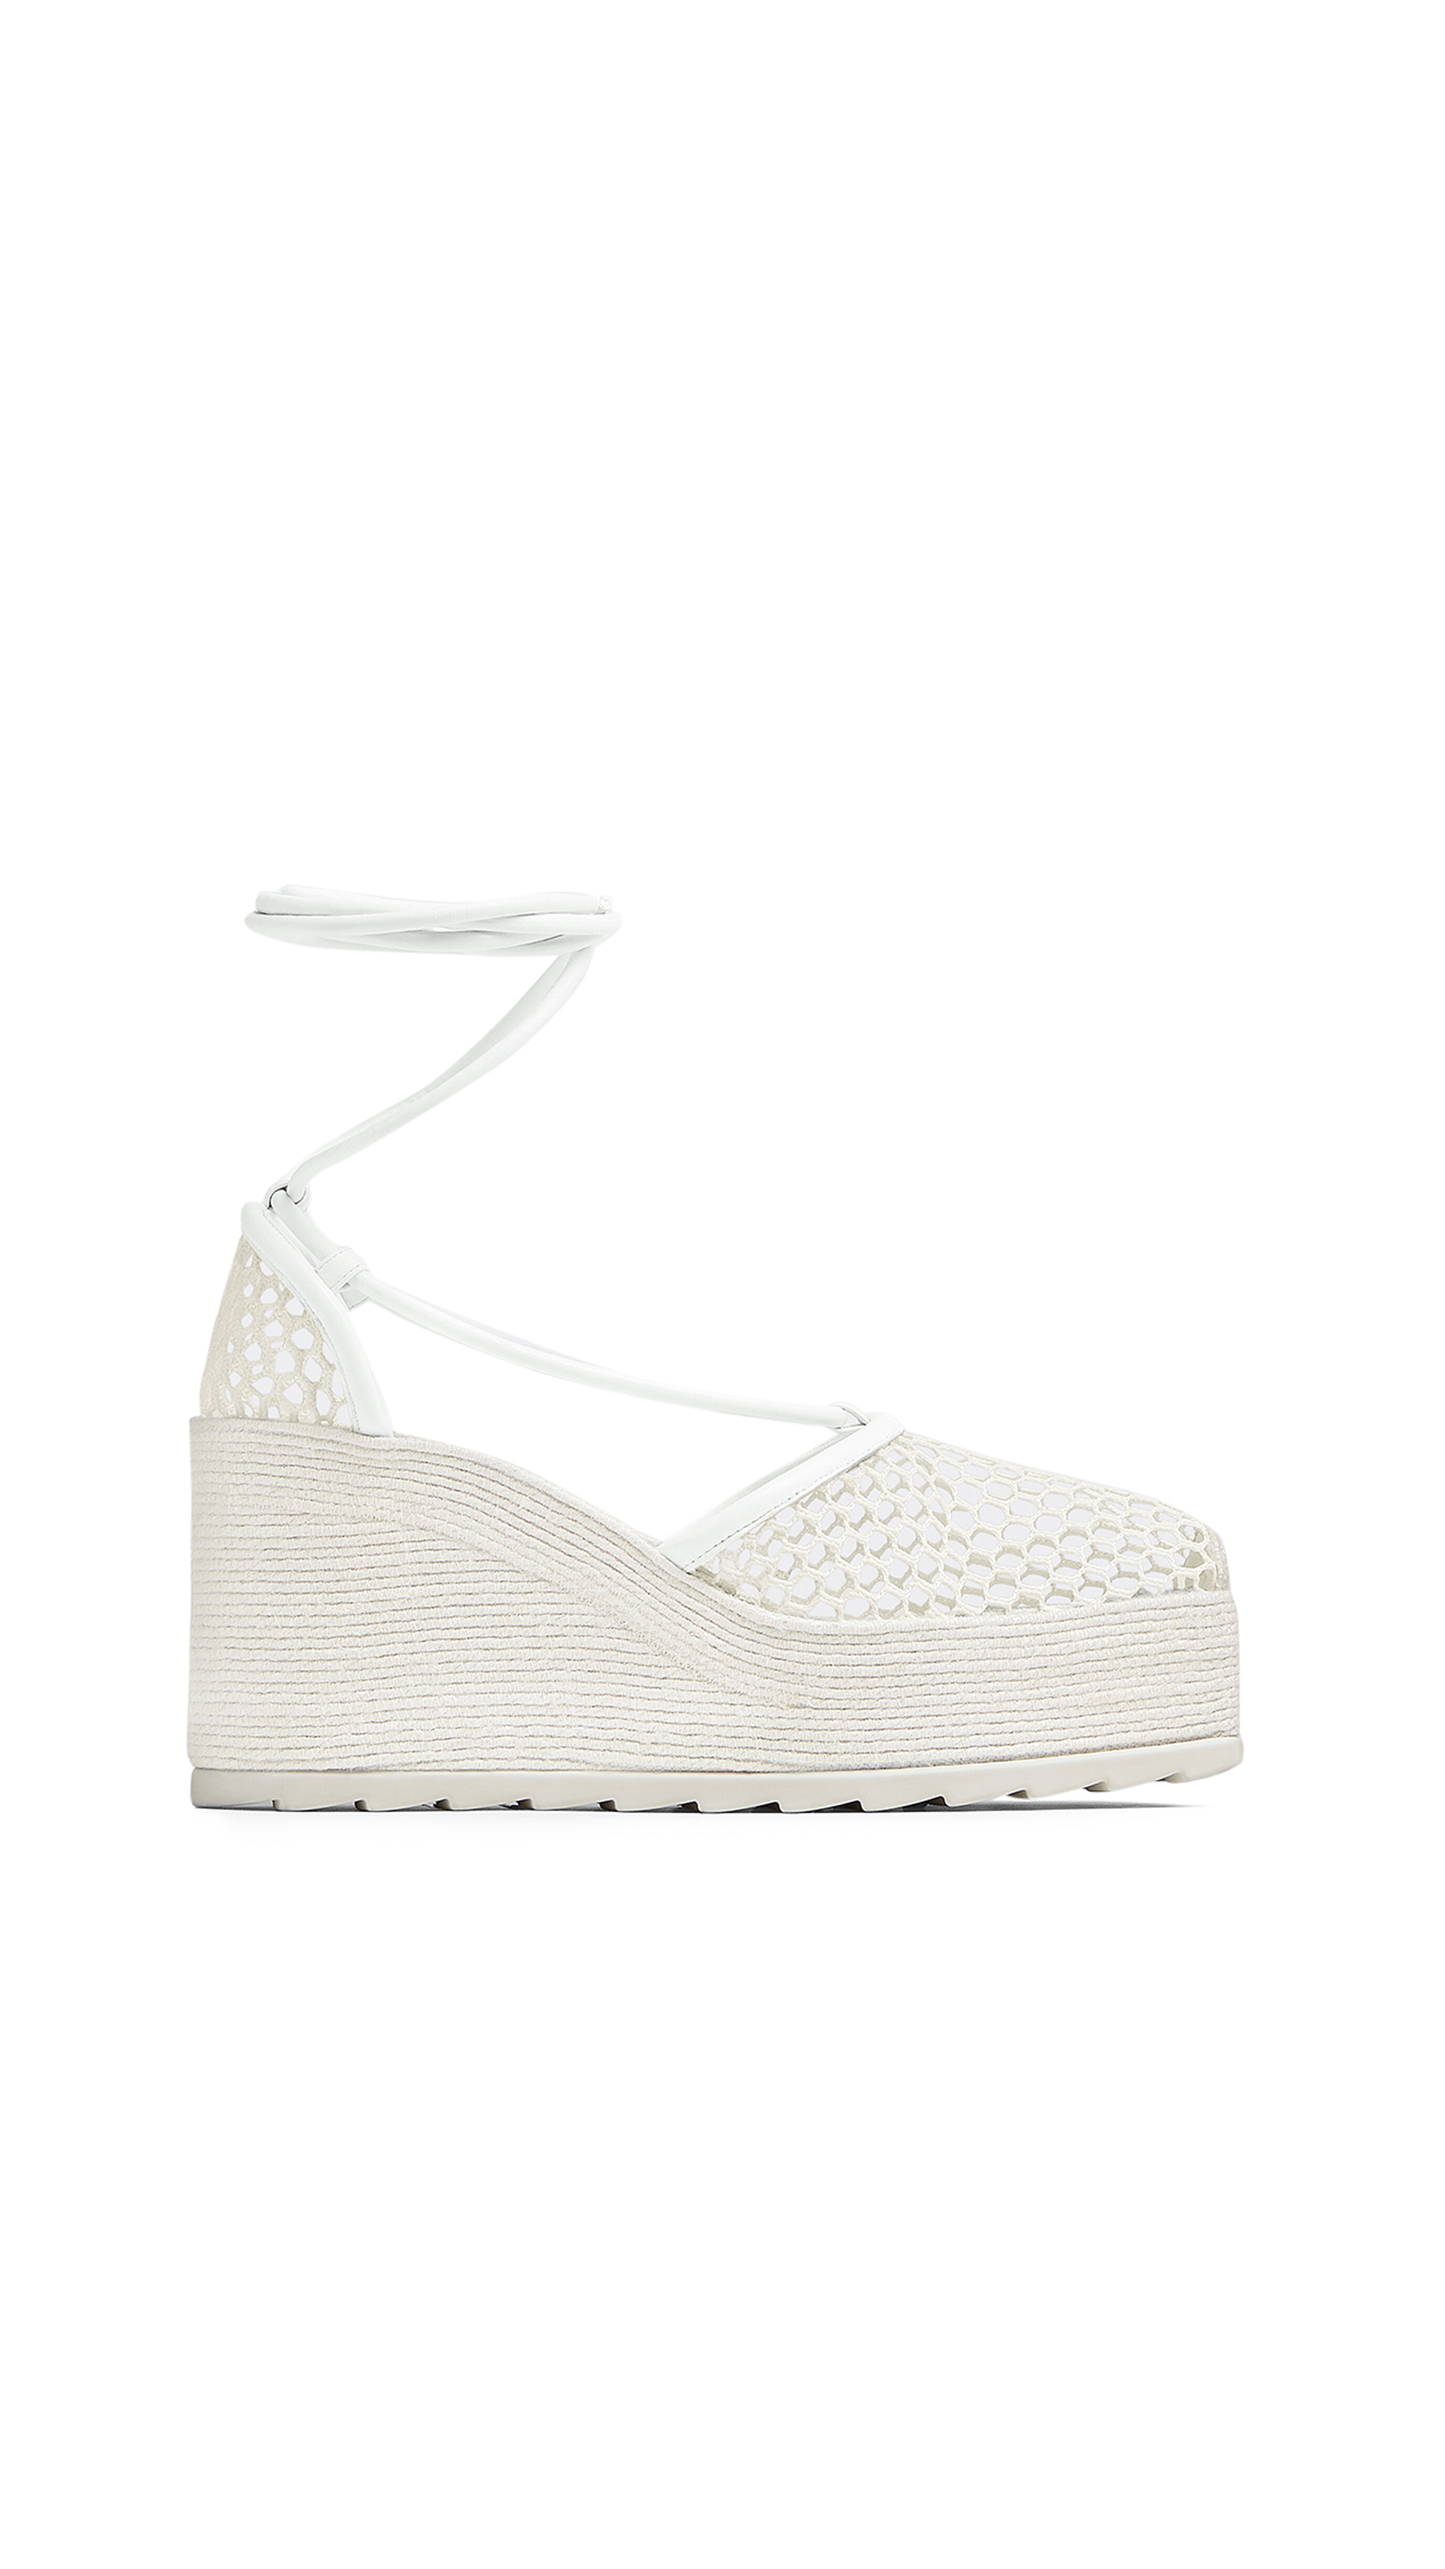 Mesh and Leather Stretch Espadrilles - Optic White